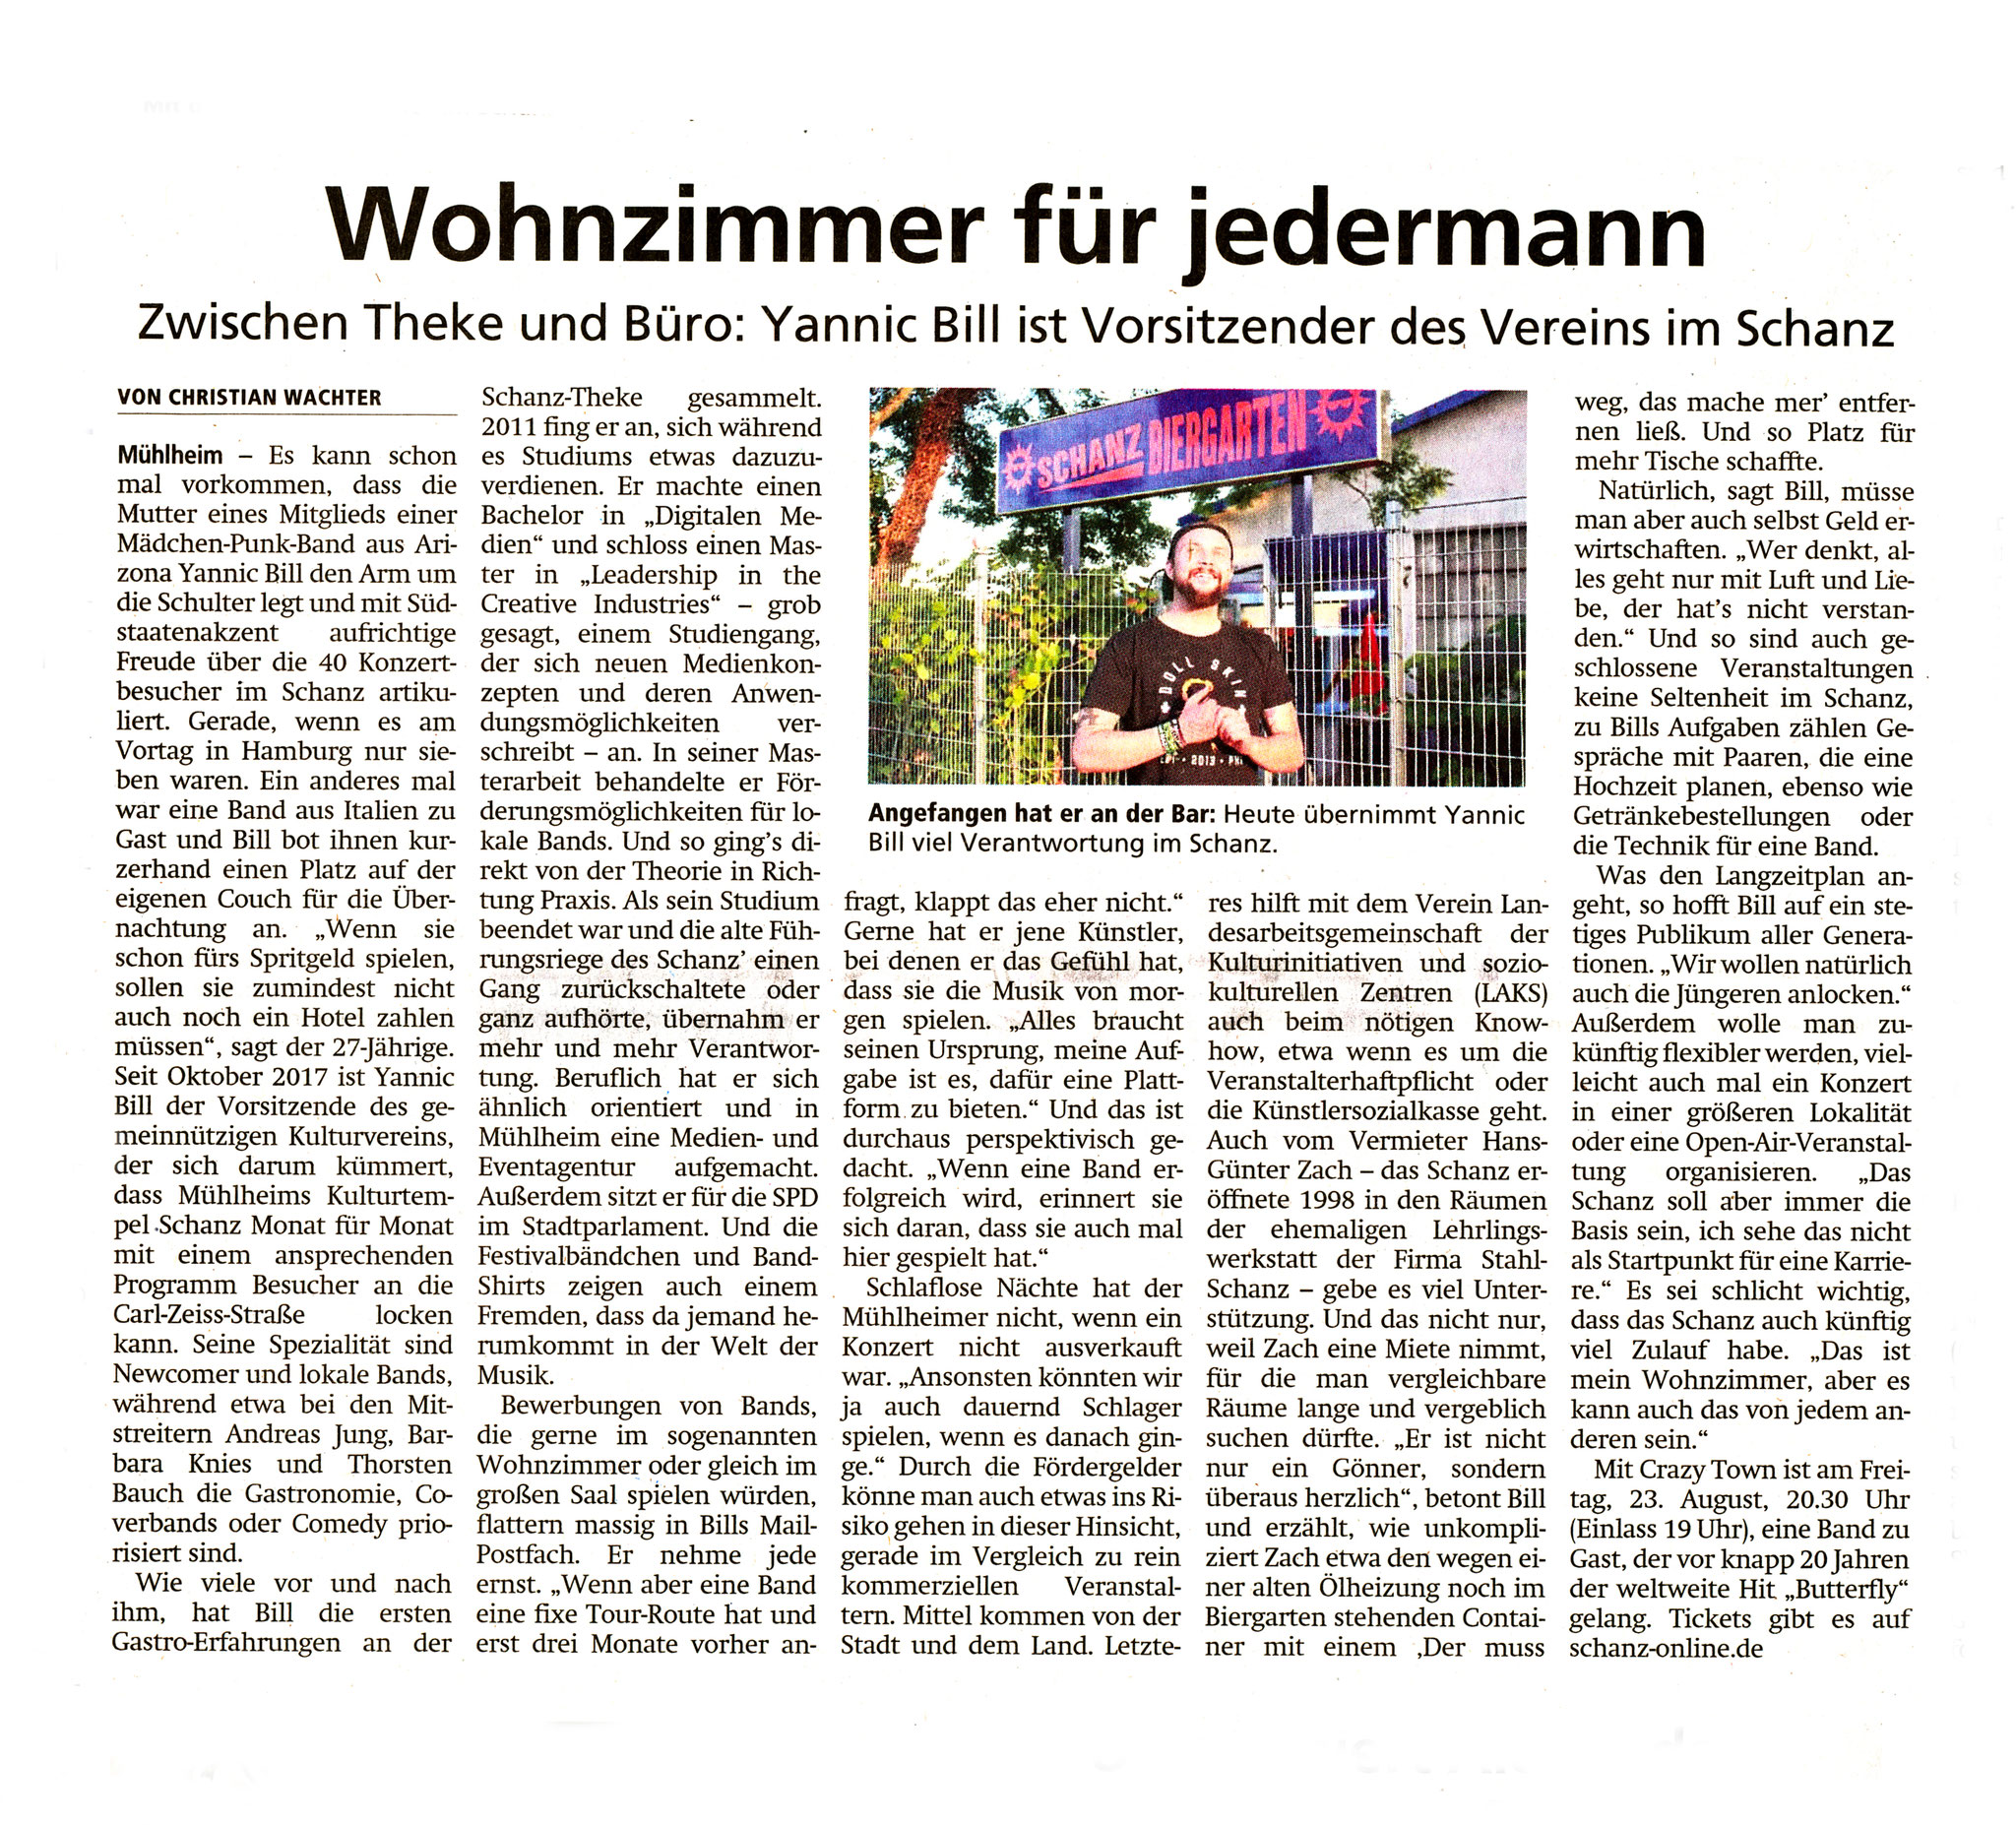 Offenbach Post, 21. August 2019